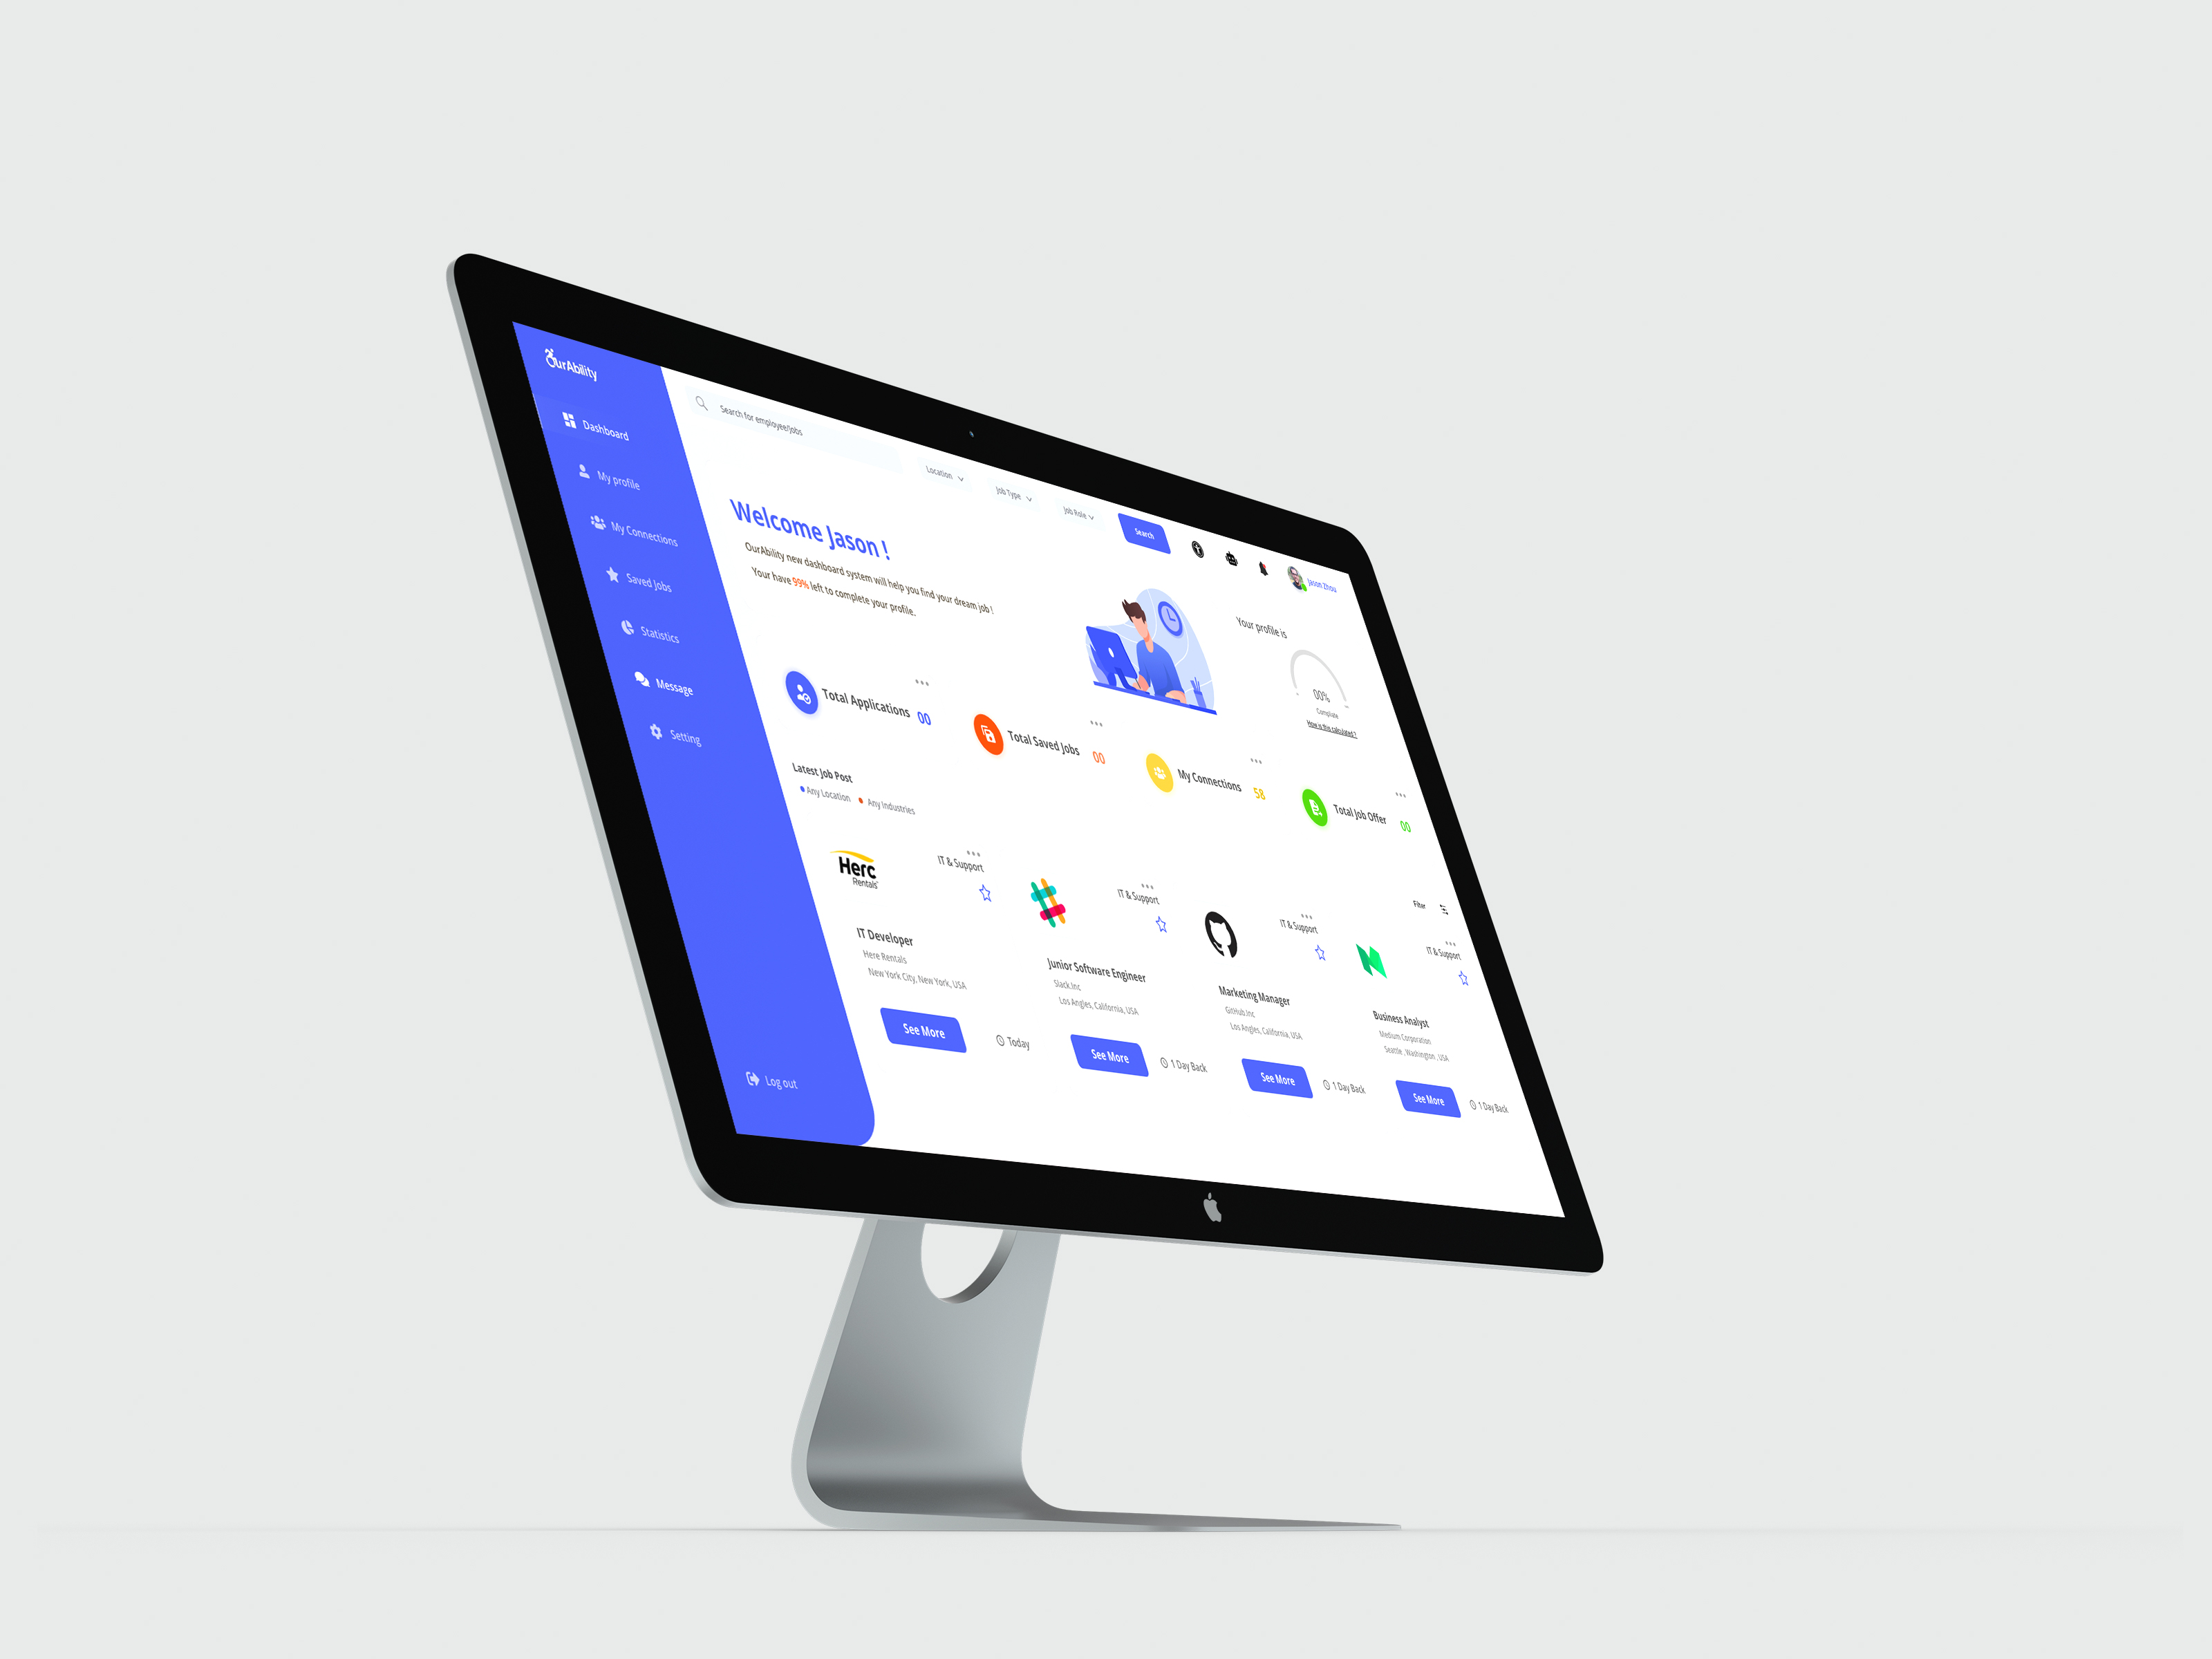 OurAbility Connect Dashboard